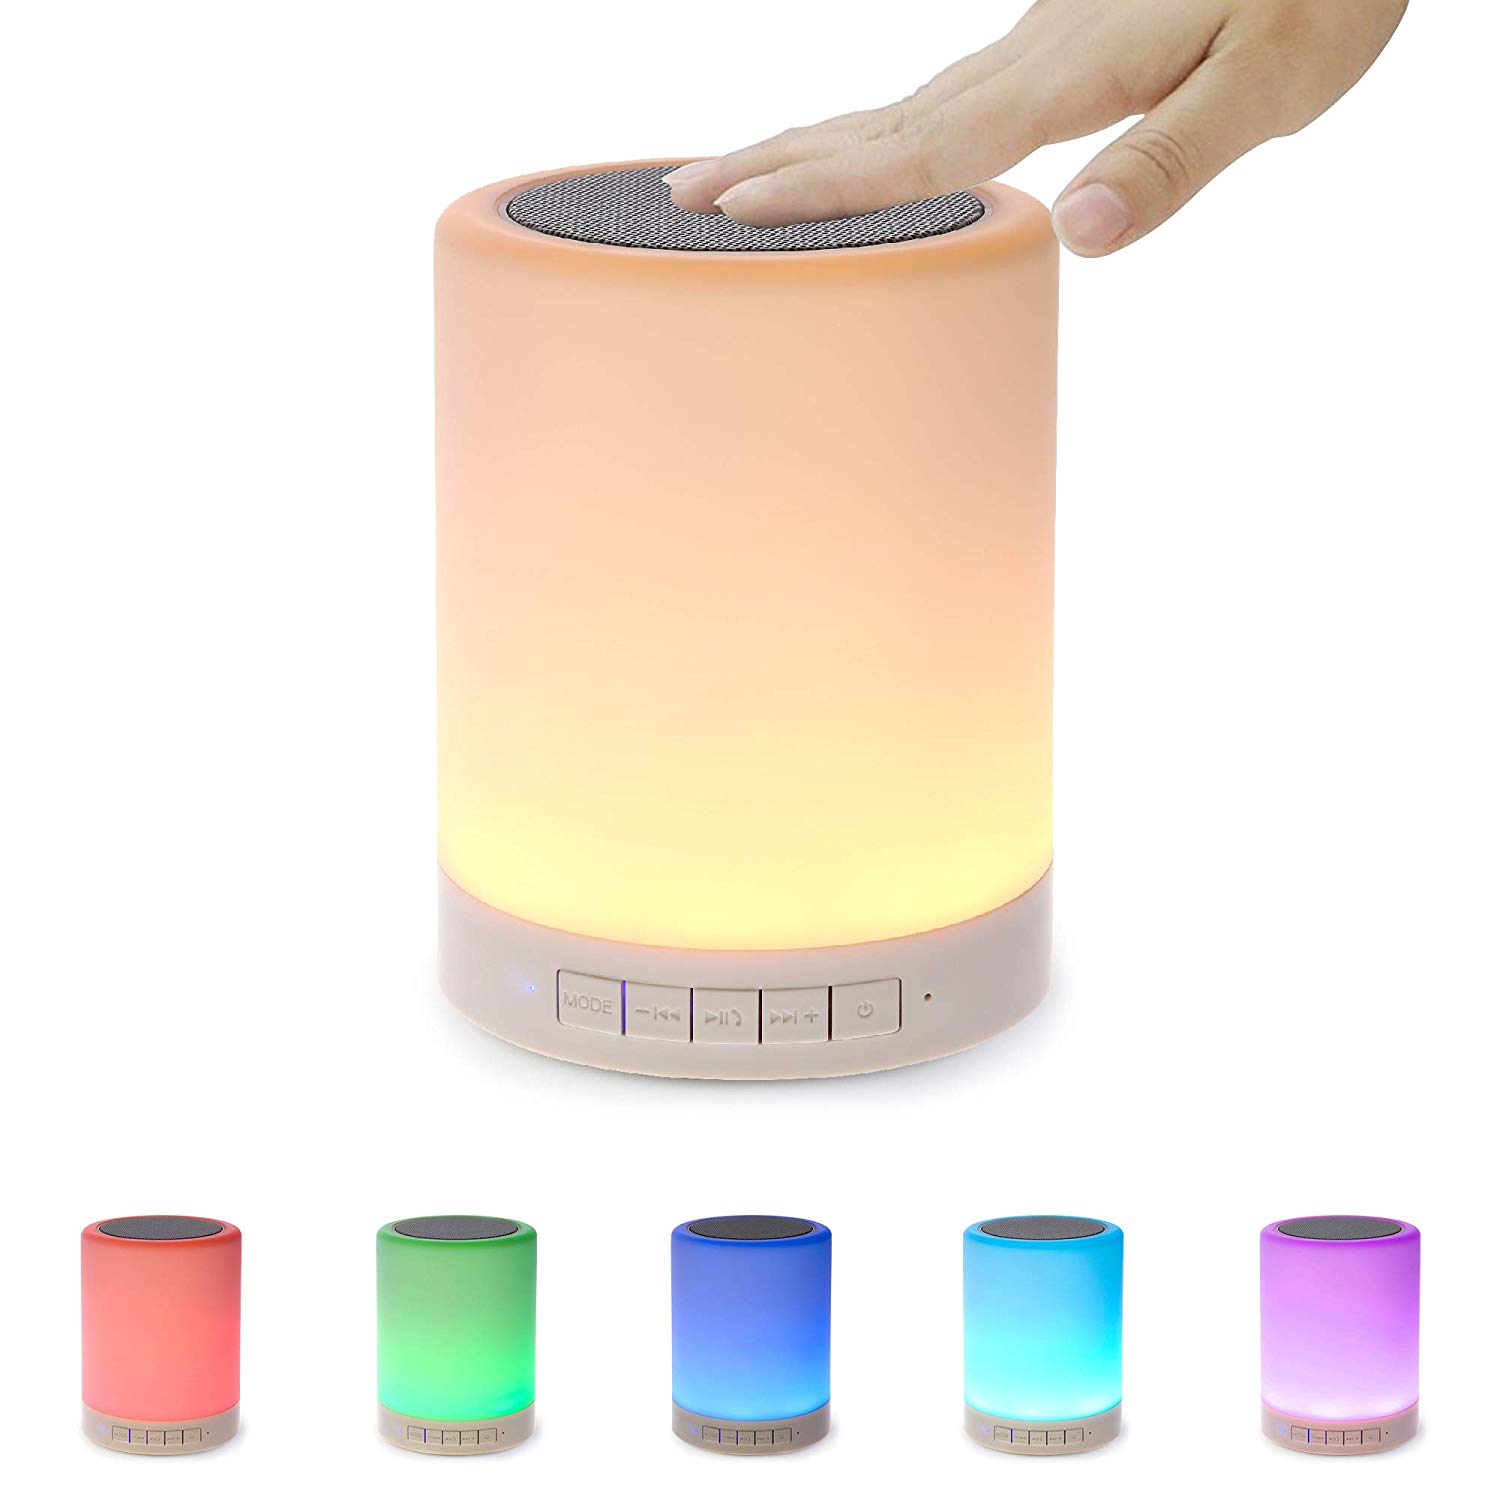 SHAVA Night Light Bluetooth Speaker, Portable Wireless Bluetooth Speakers, Touch Control, Color LED Speaker, Bedside Table Light, Speakerphone/TF Card/AUX-in Supported (White), 7